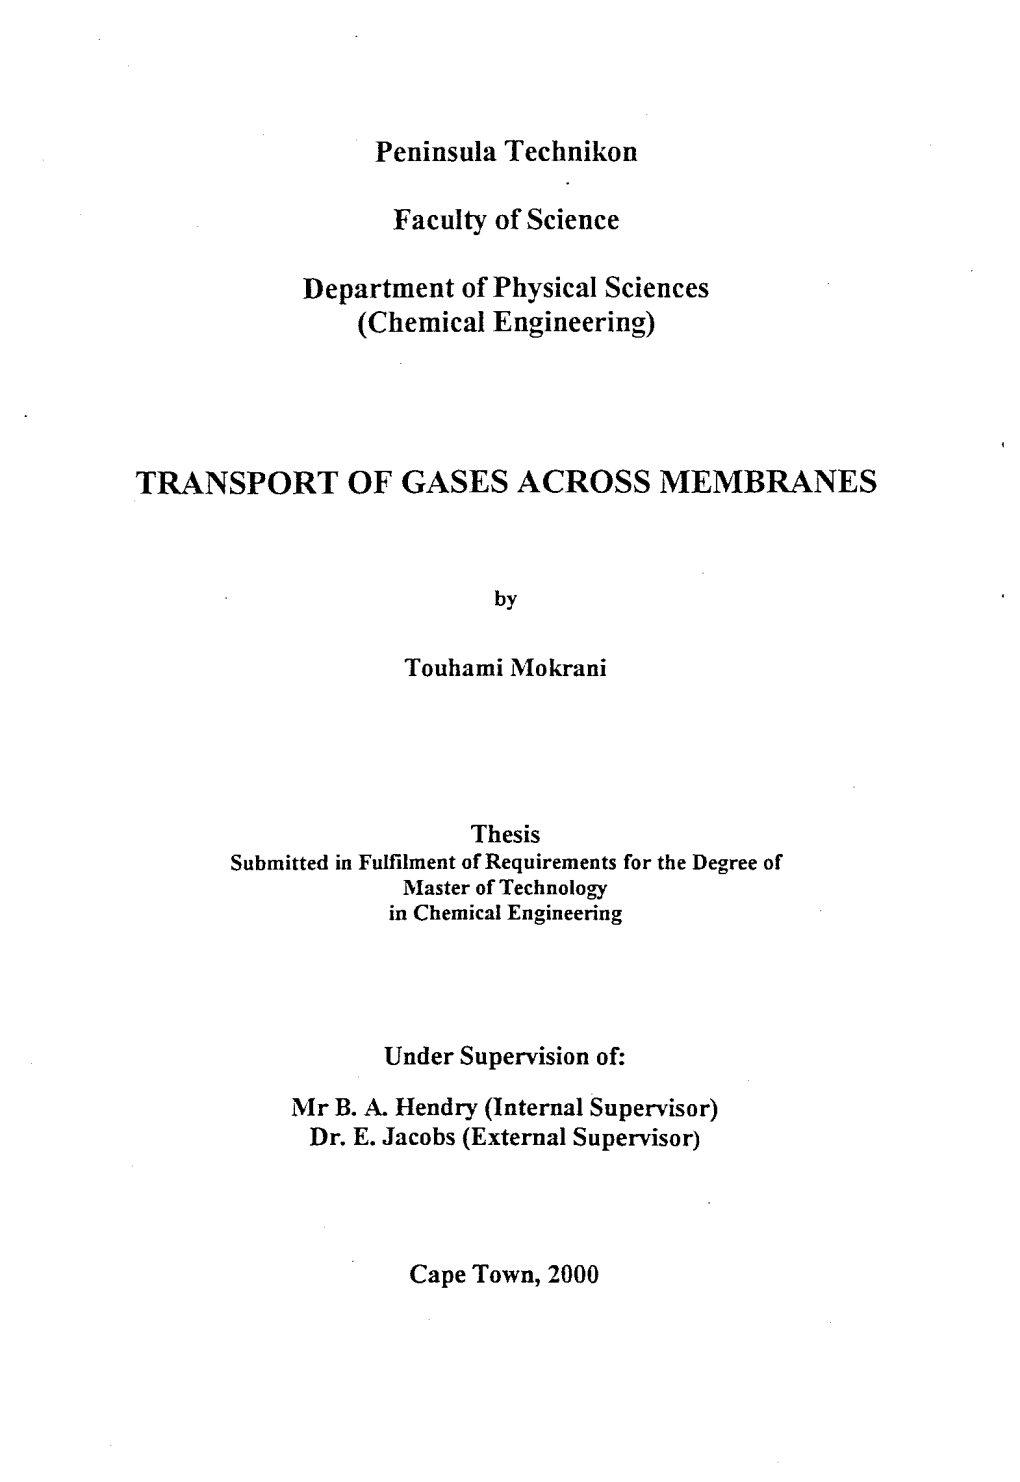 Transport of Gases Across Membranes